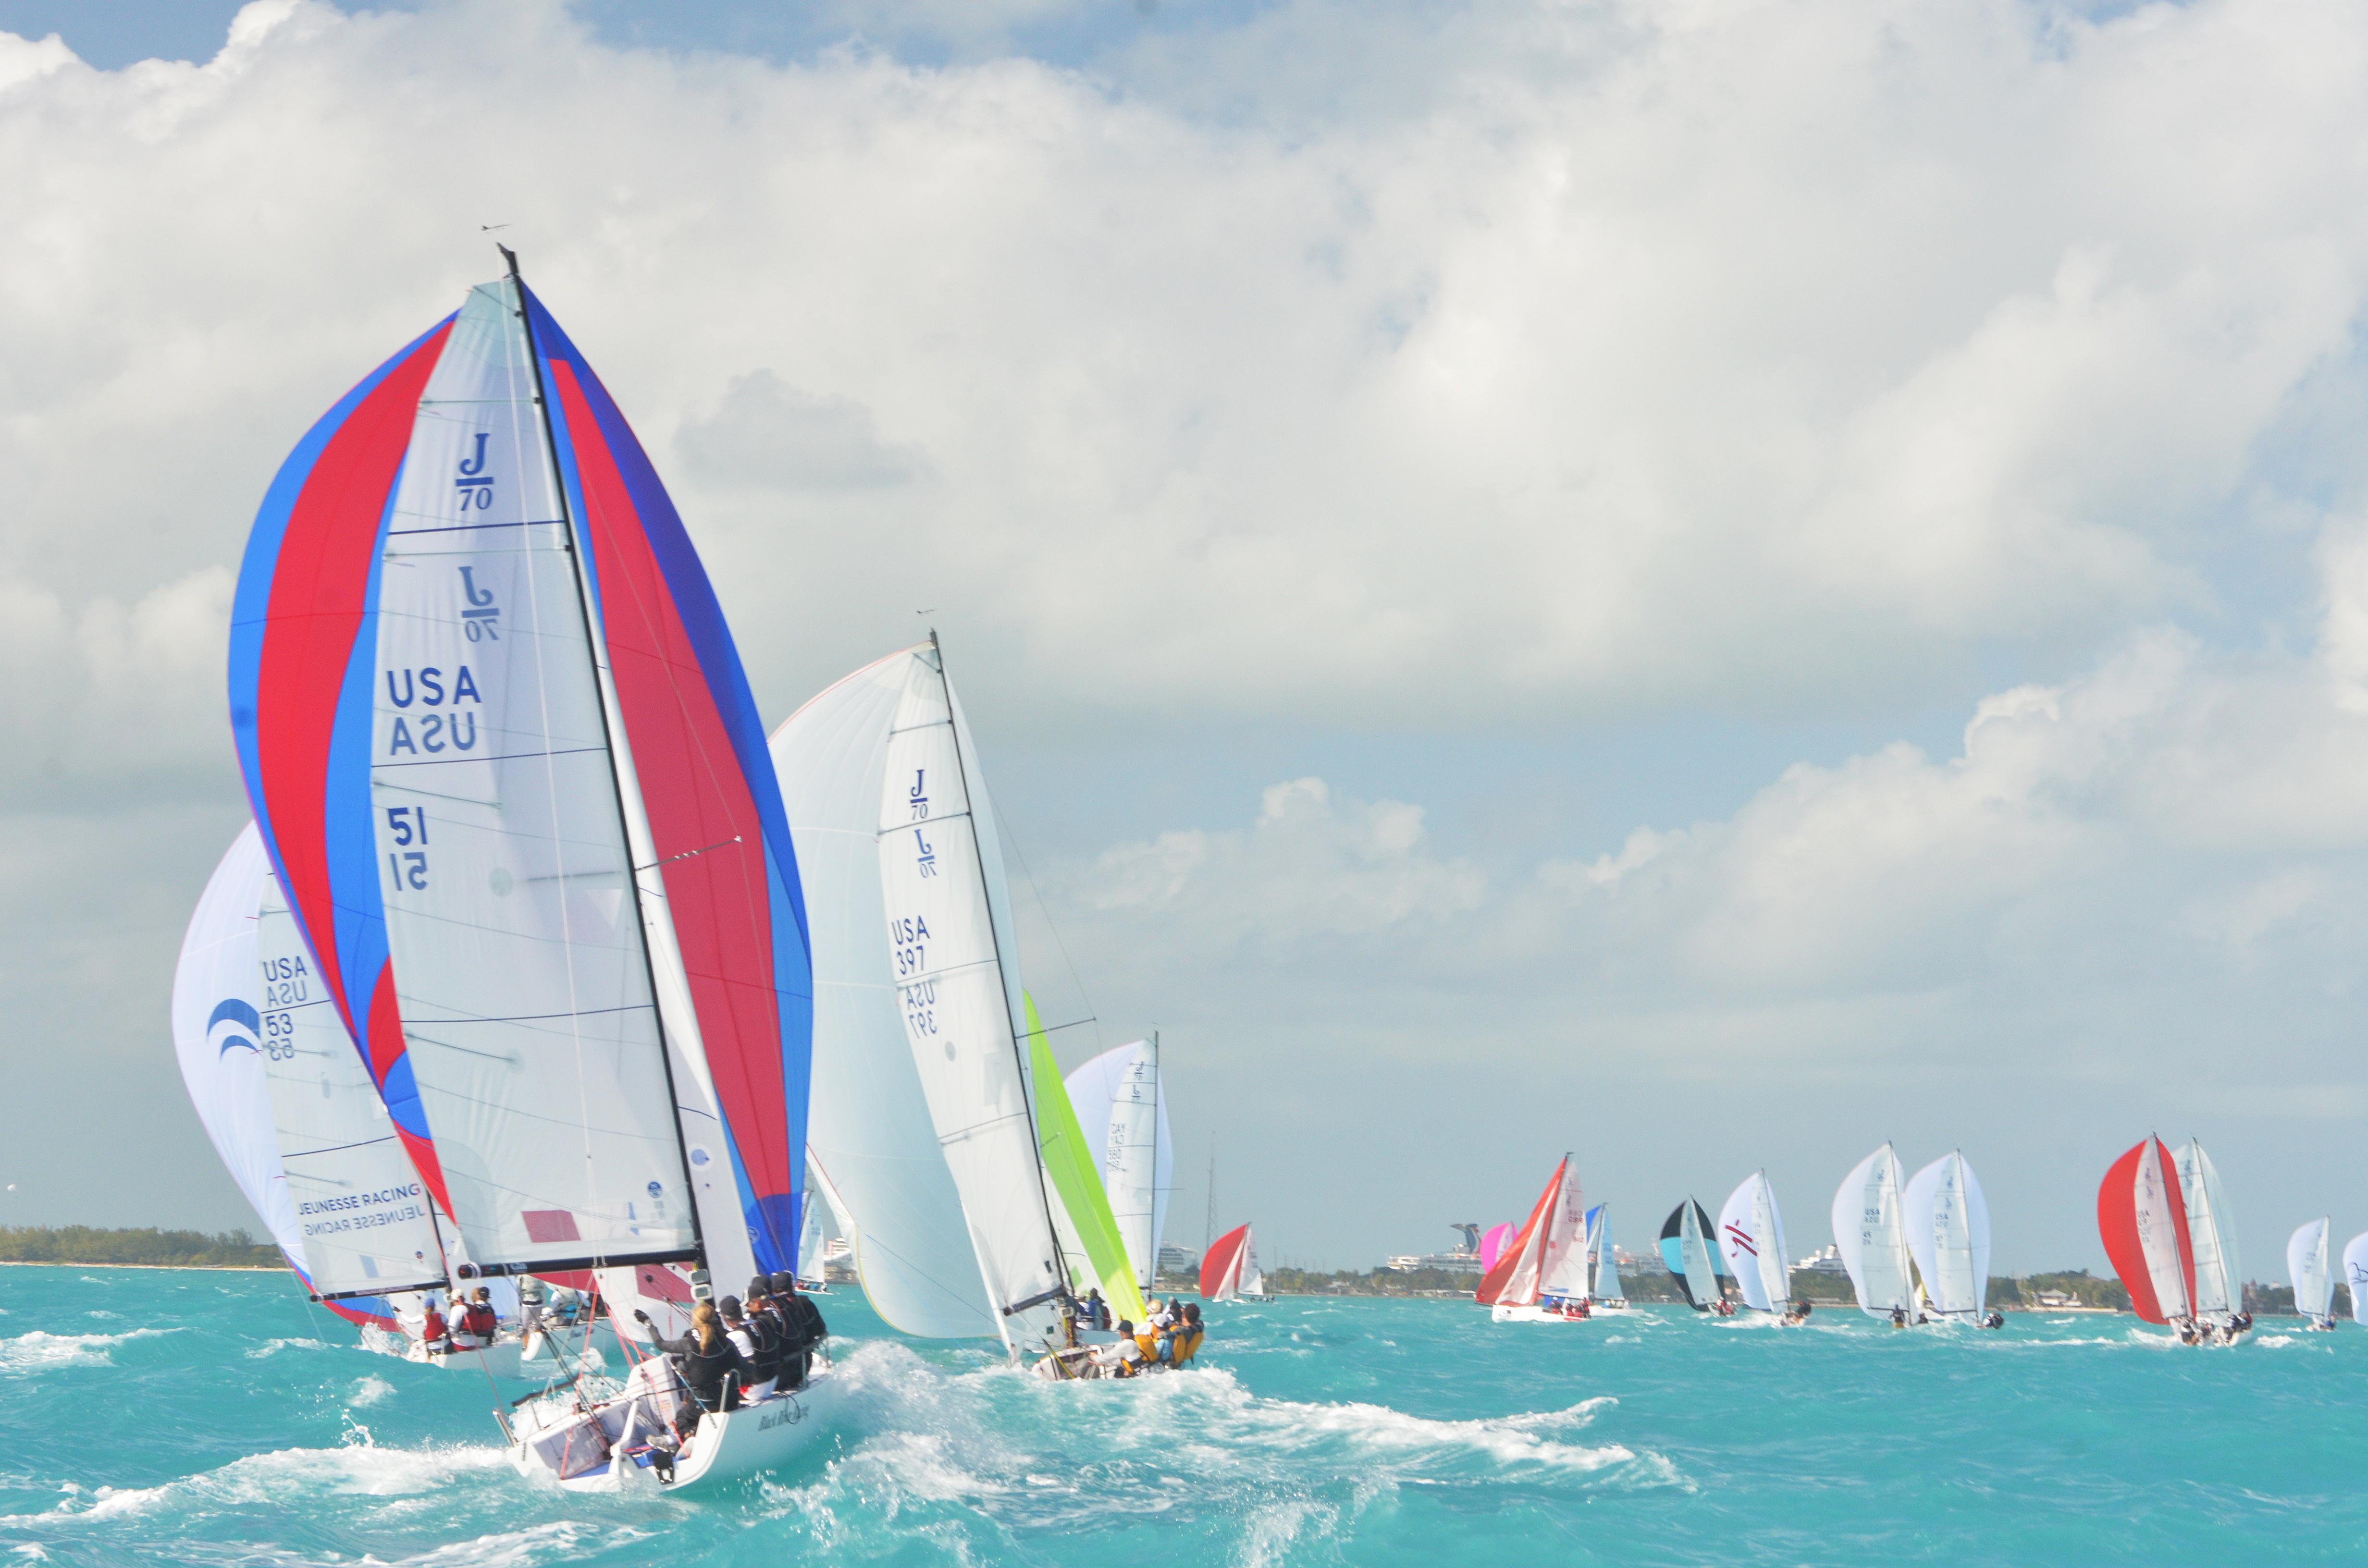 J/70s at Quantum Key West Race Week. Photo by Shannon Hibberd